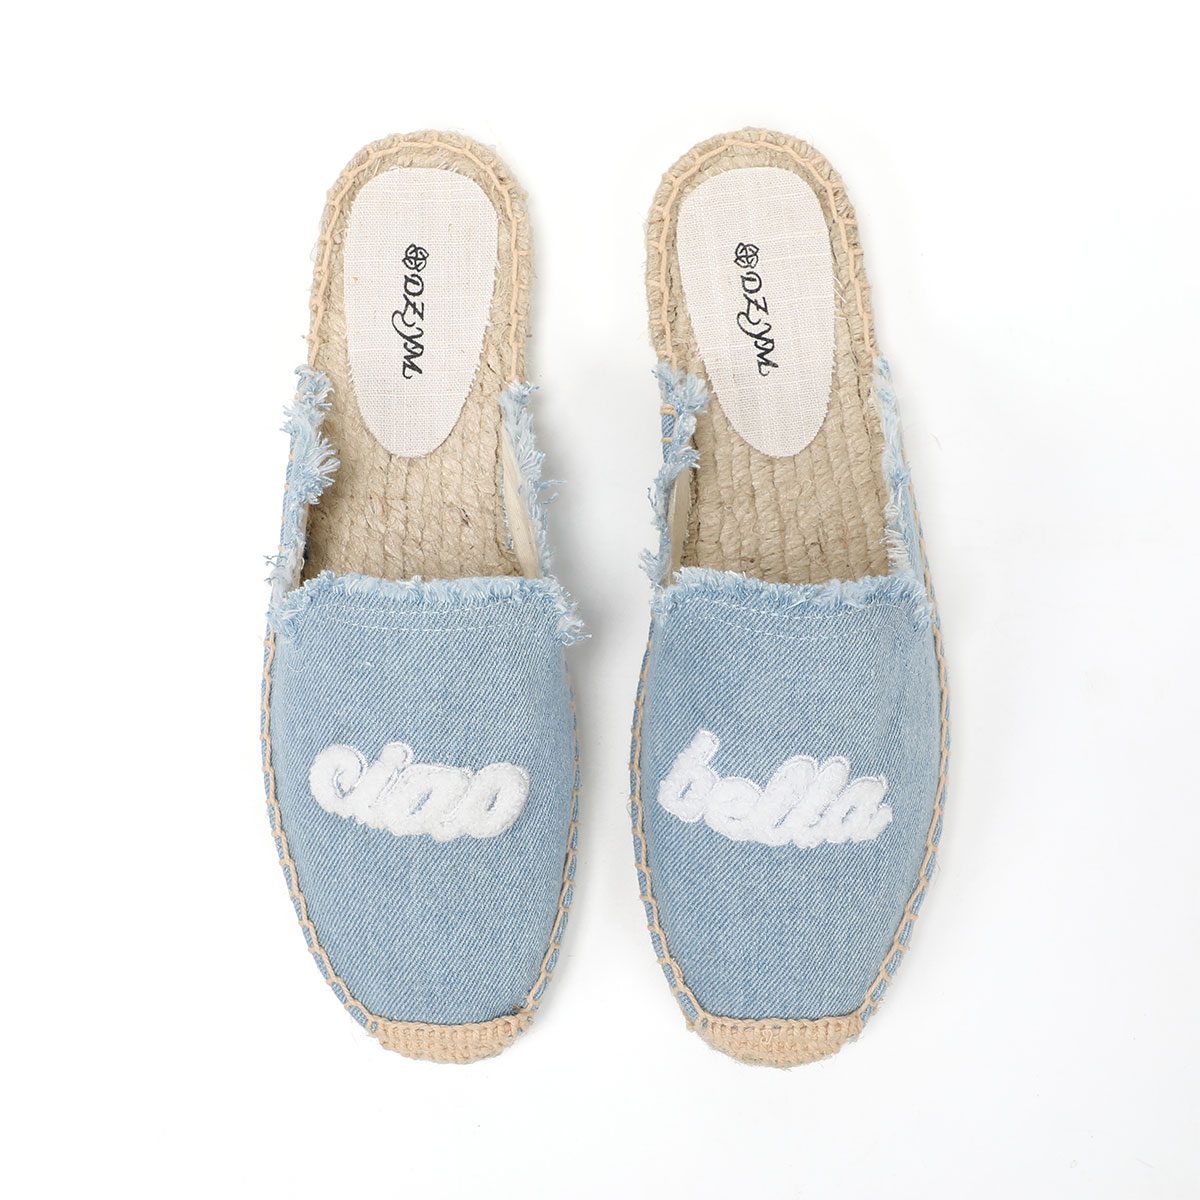 Ladies Summer Flat Breathable Espadrille Slippers Fashion Casual Simple Beach Sandals Ladies Muller Shoes Shallow Mouth Slip On